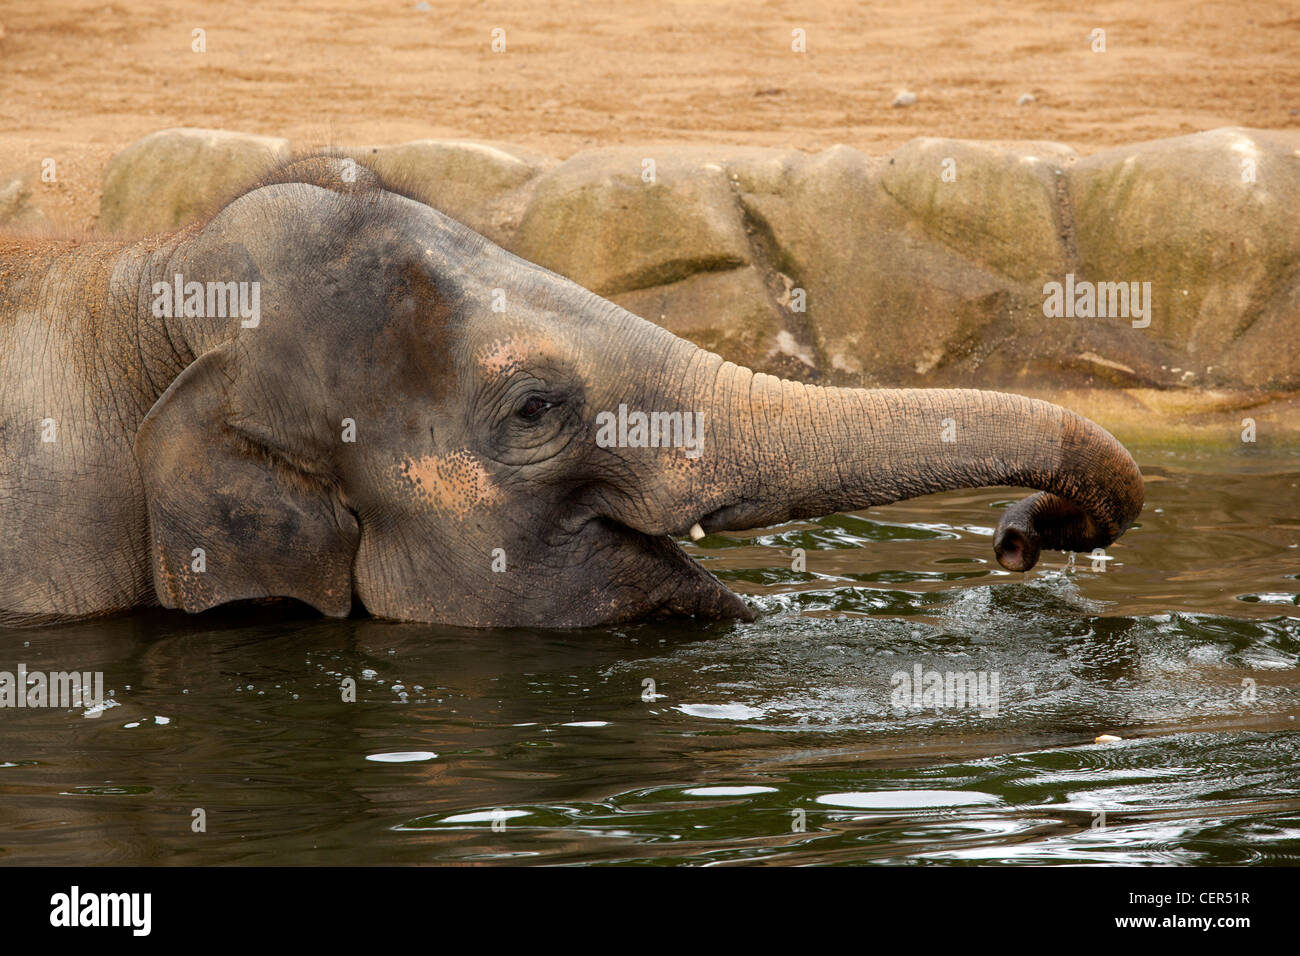 Asian elephants at Twycross Zoo swimming in the 'Uda Walawe' section of the zoo. Stock Photo